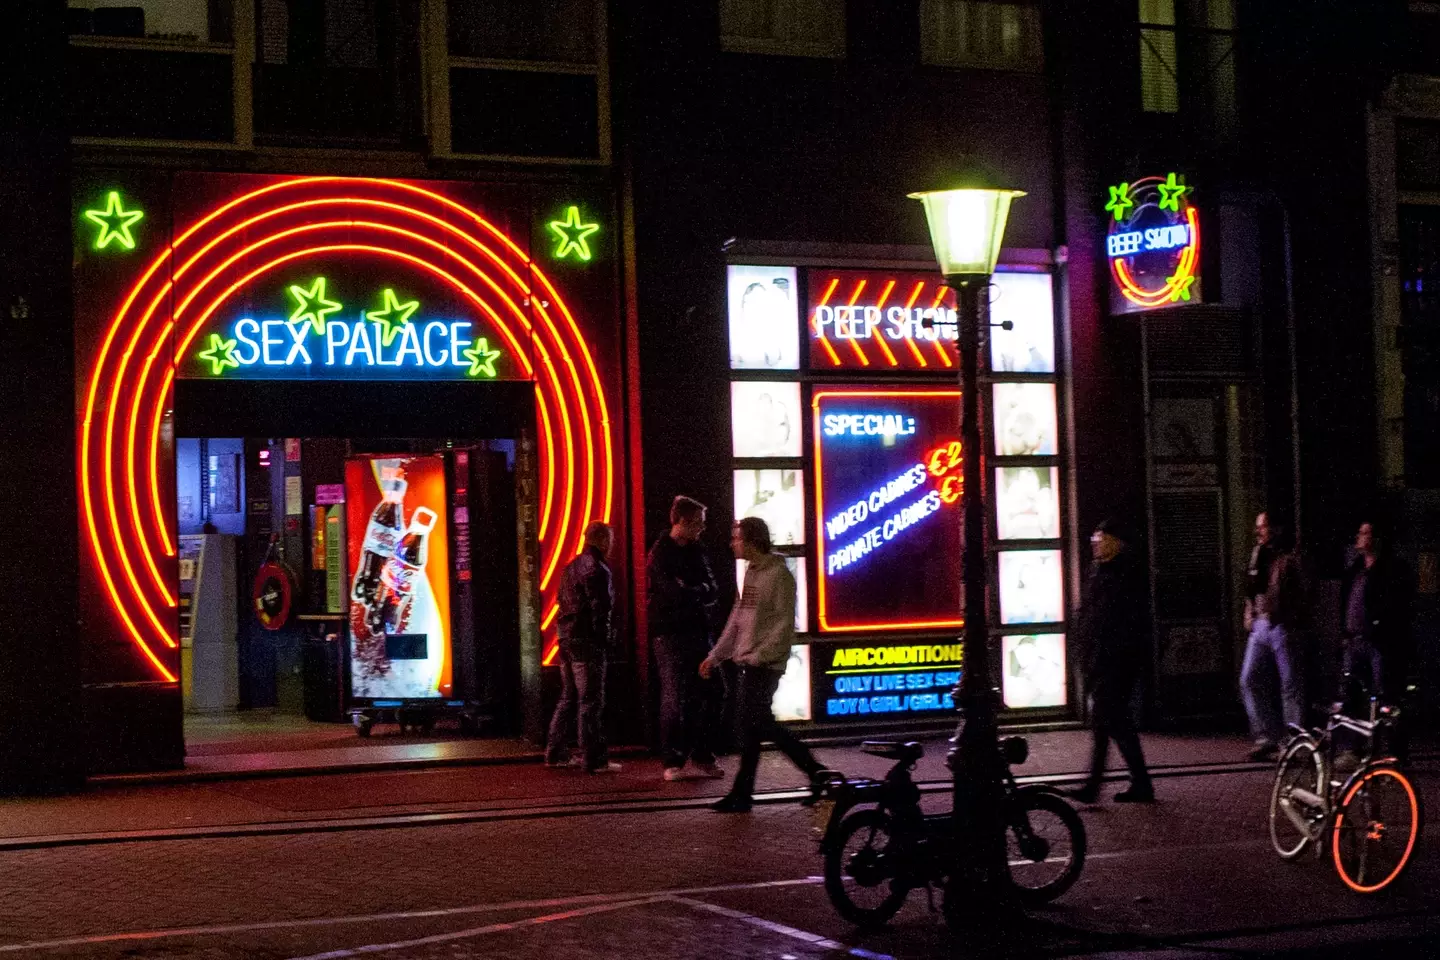 There’s plenty of harmless fun in sex shops, peep shows and museums.